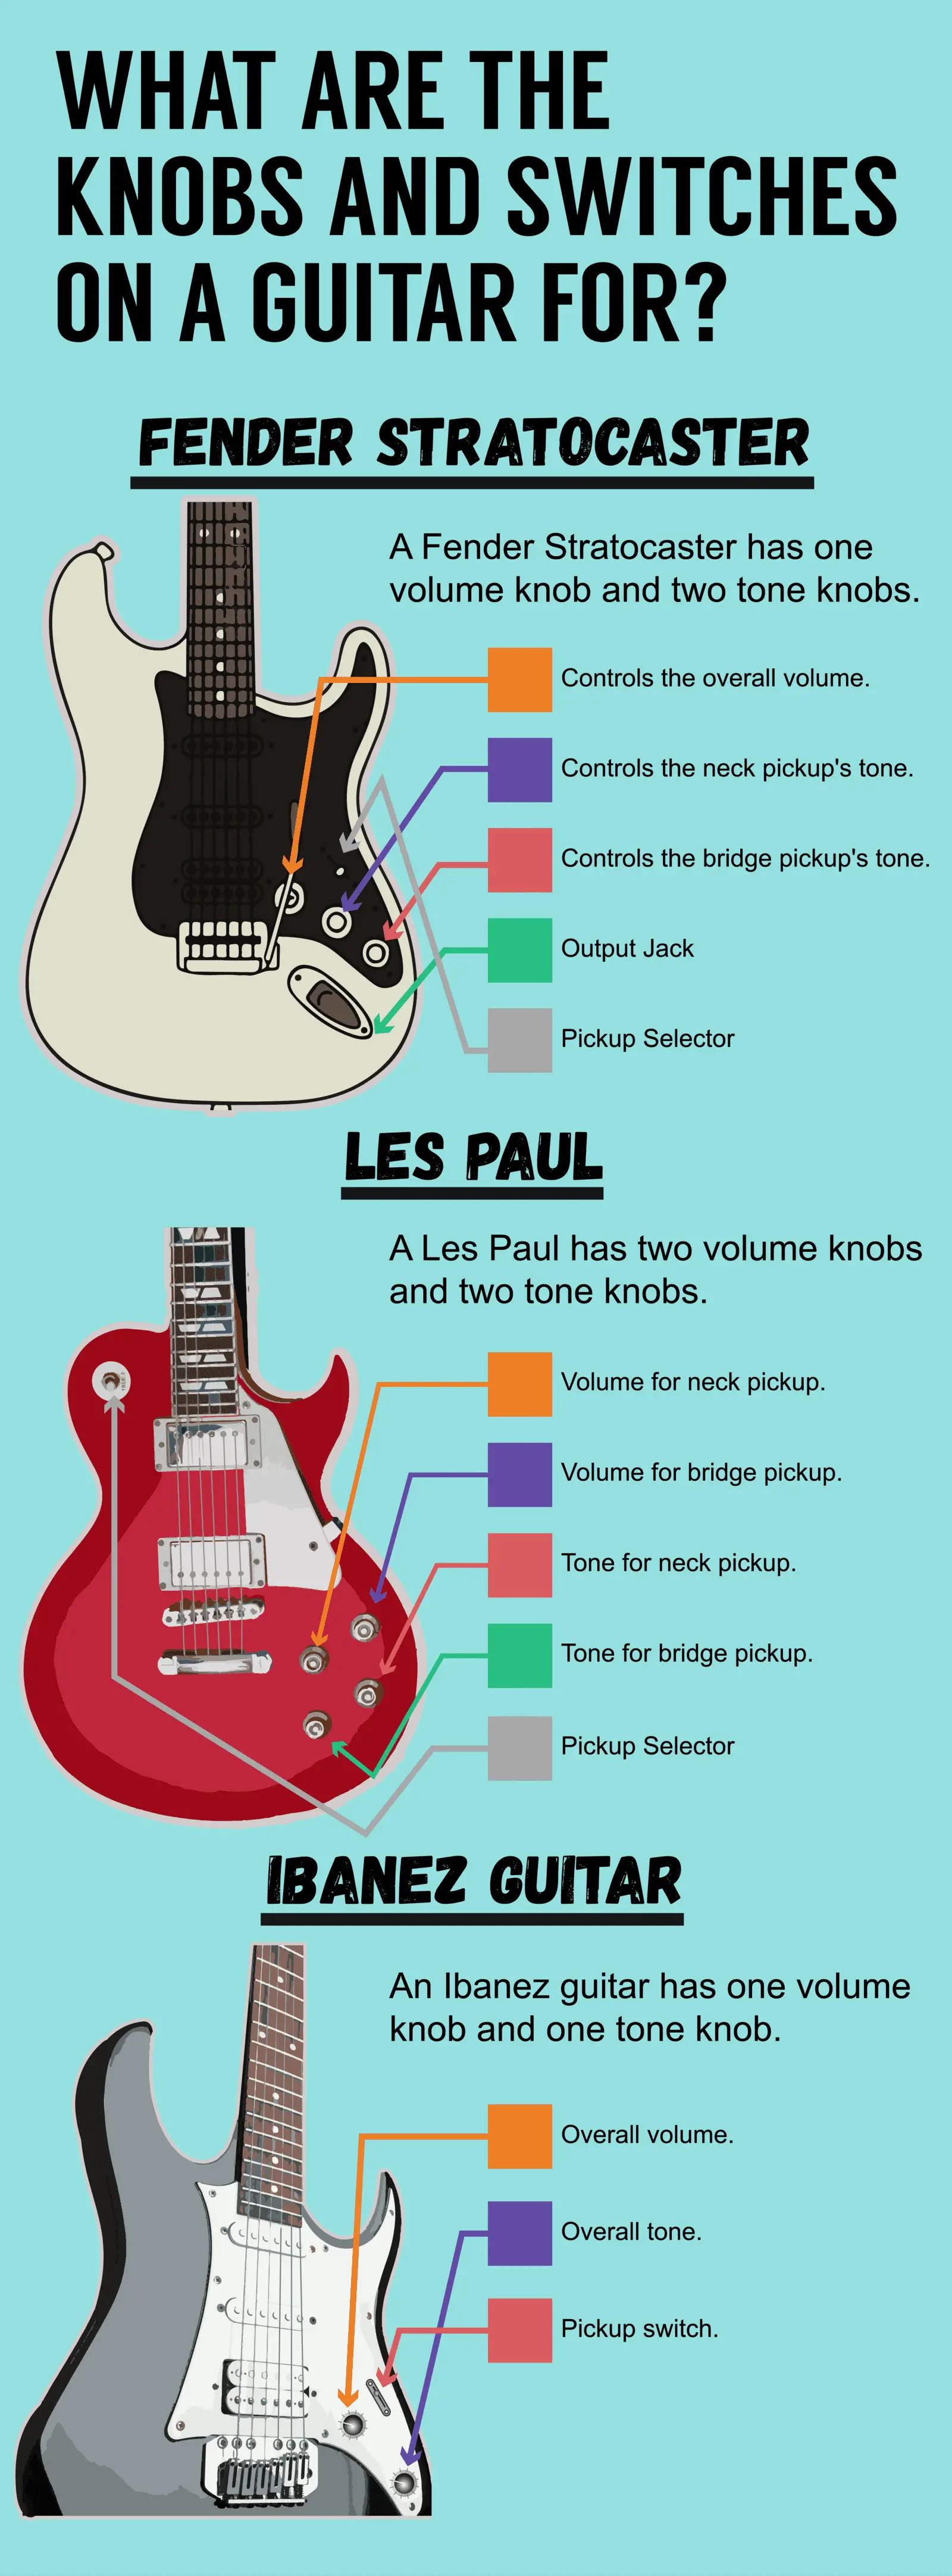 Knobs and switches on different types of electric guitars infographic